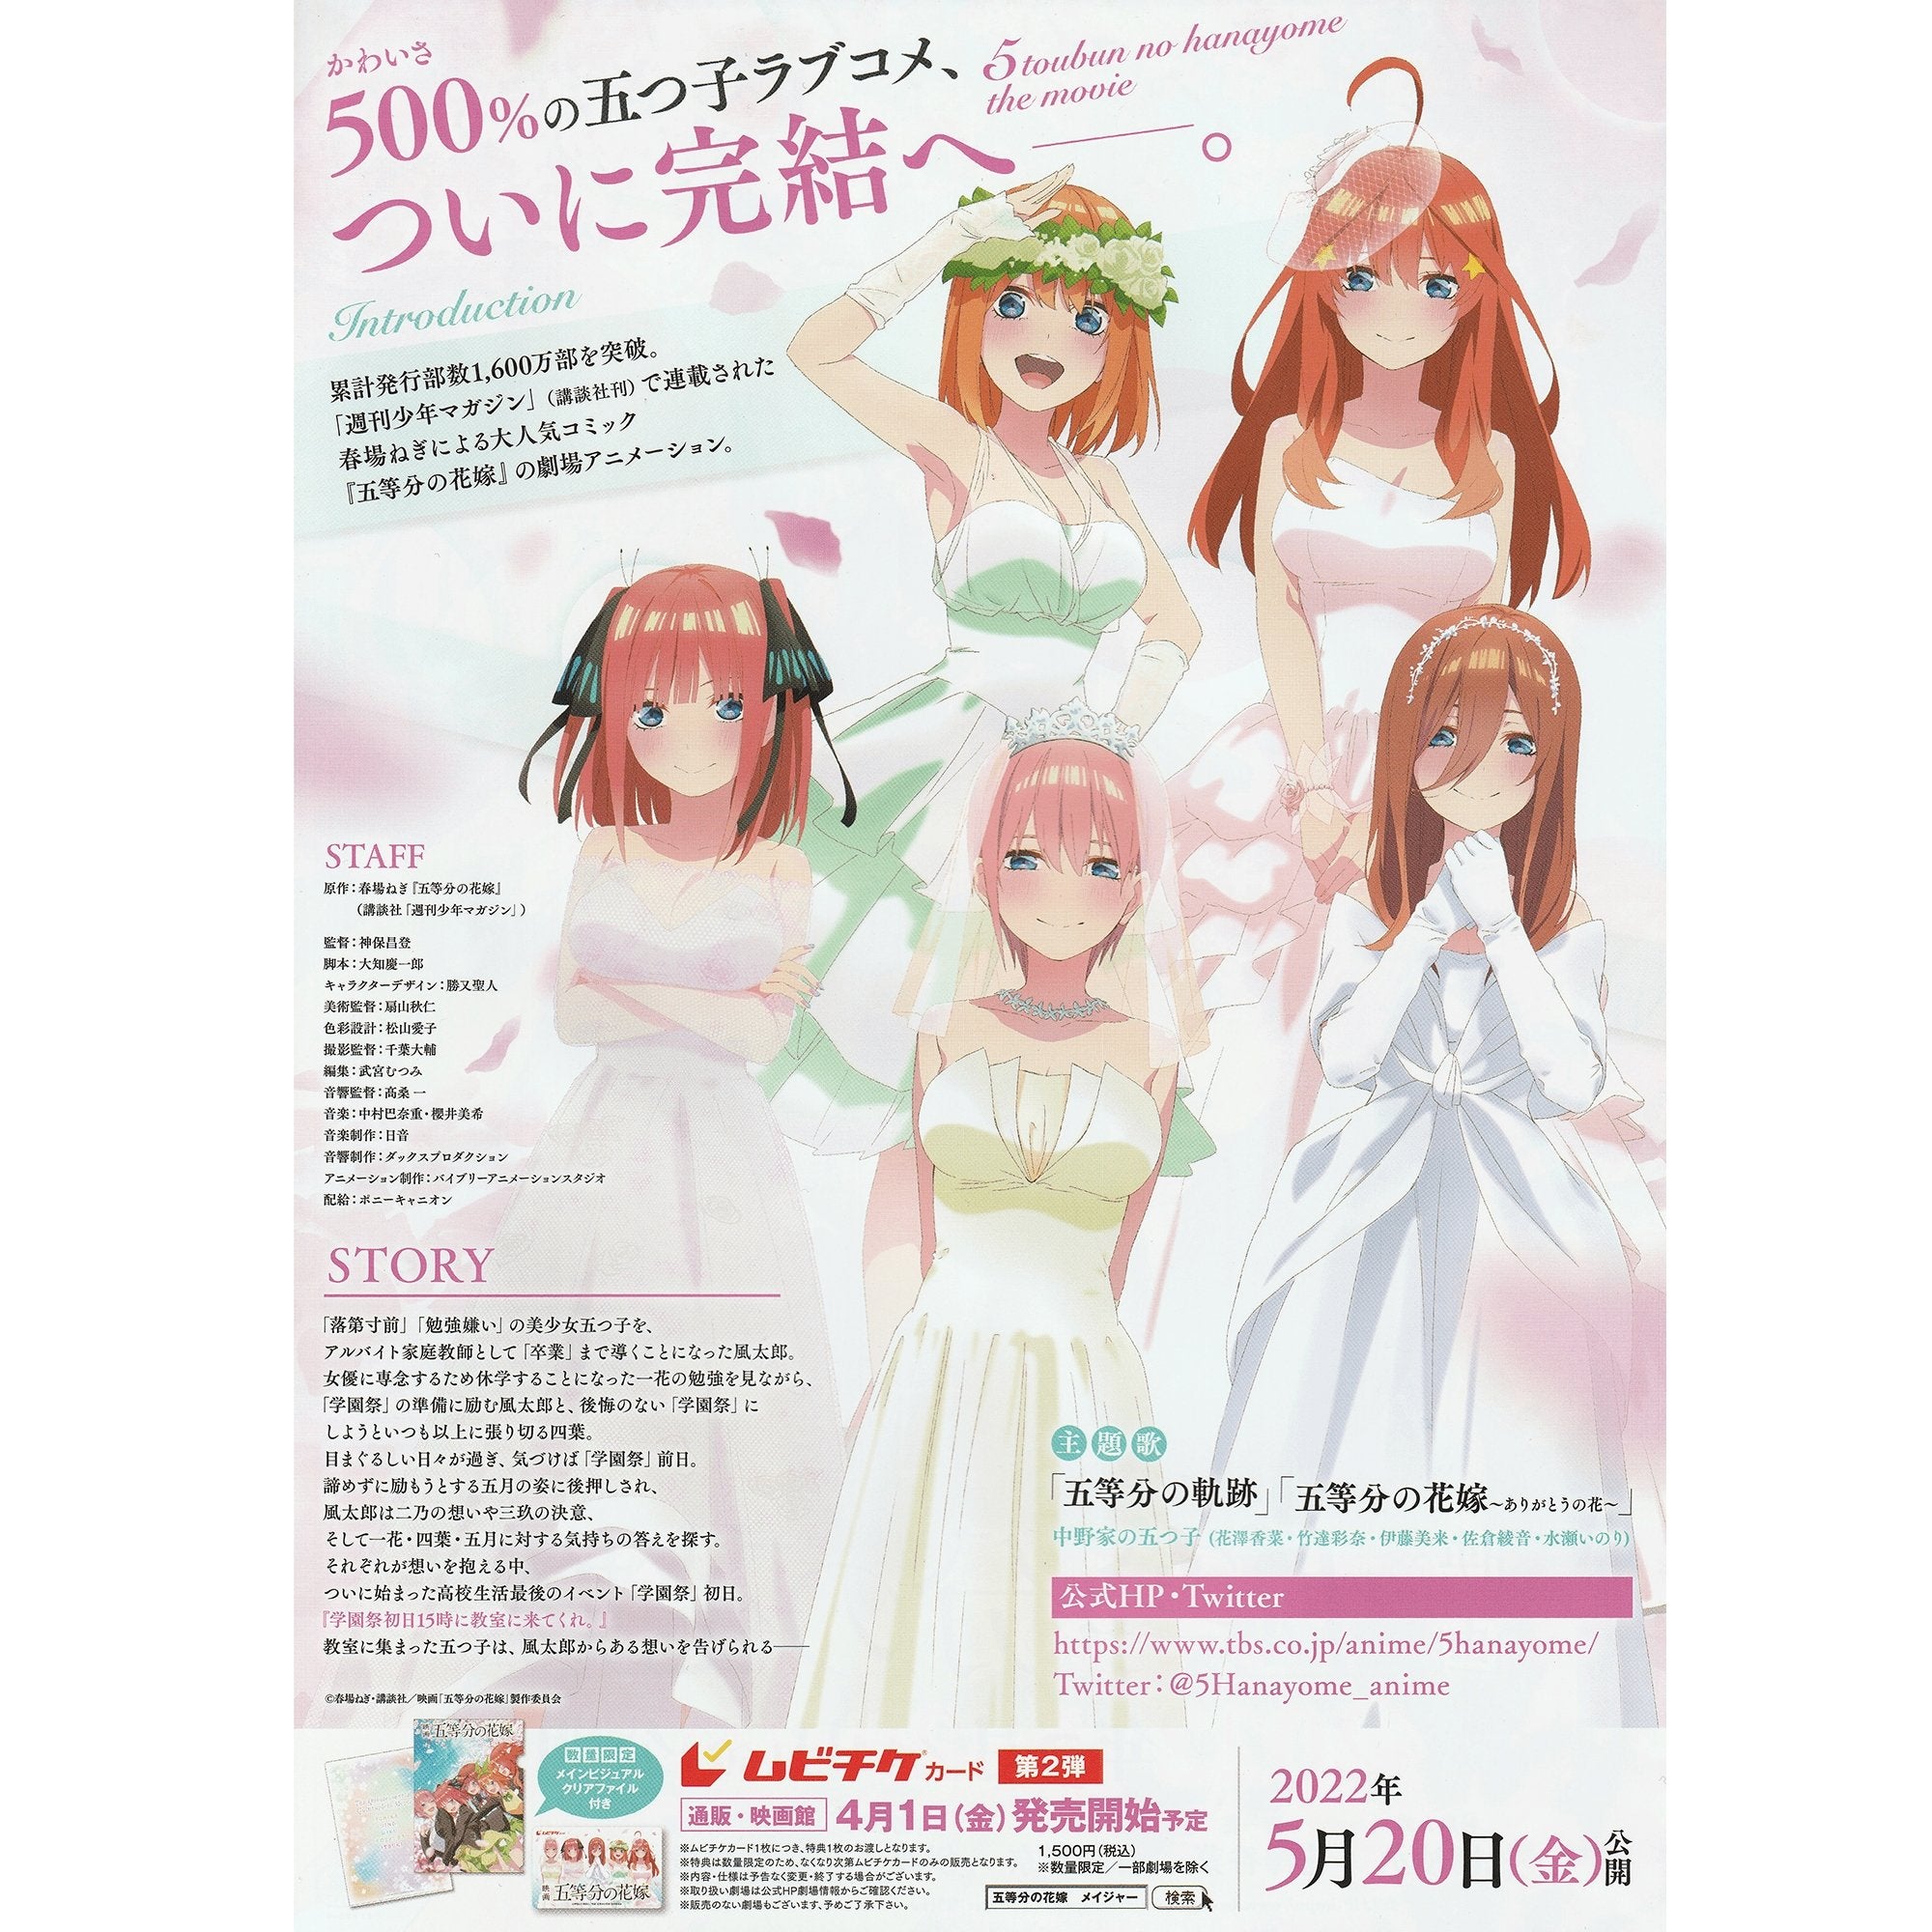 The Quintessential Quintuplets movie release date confirmed for